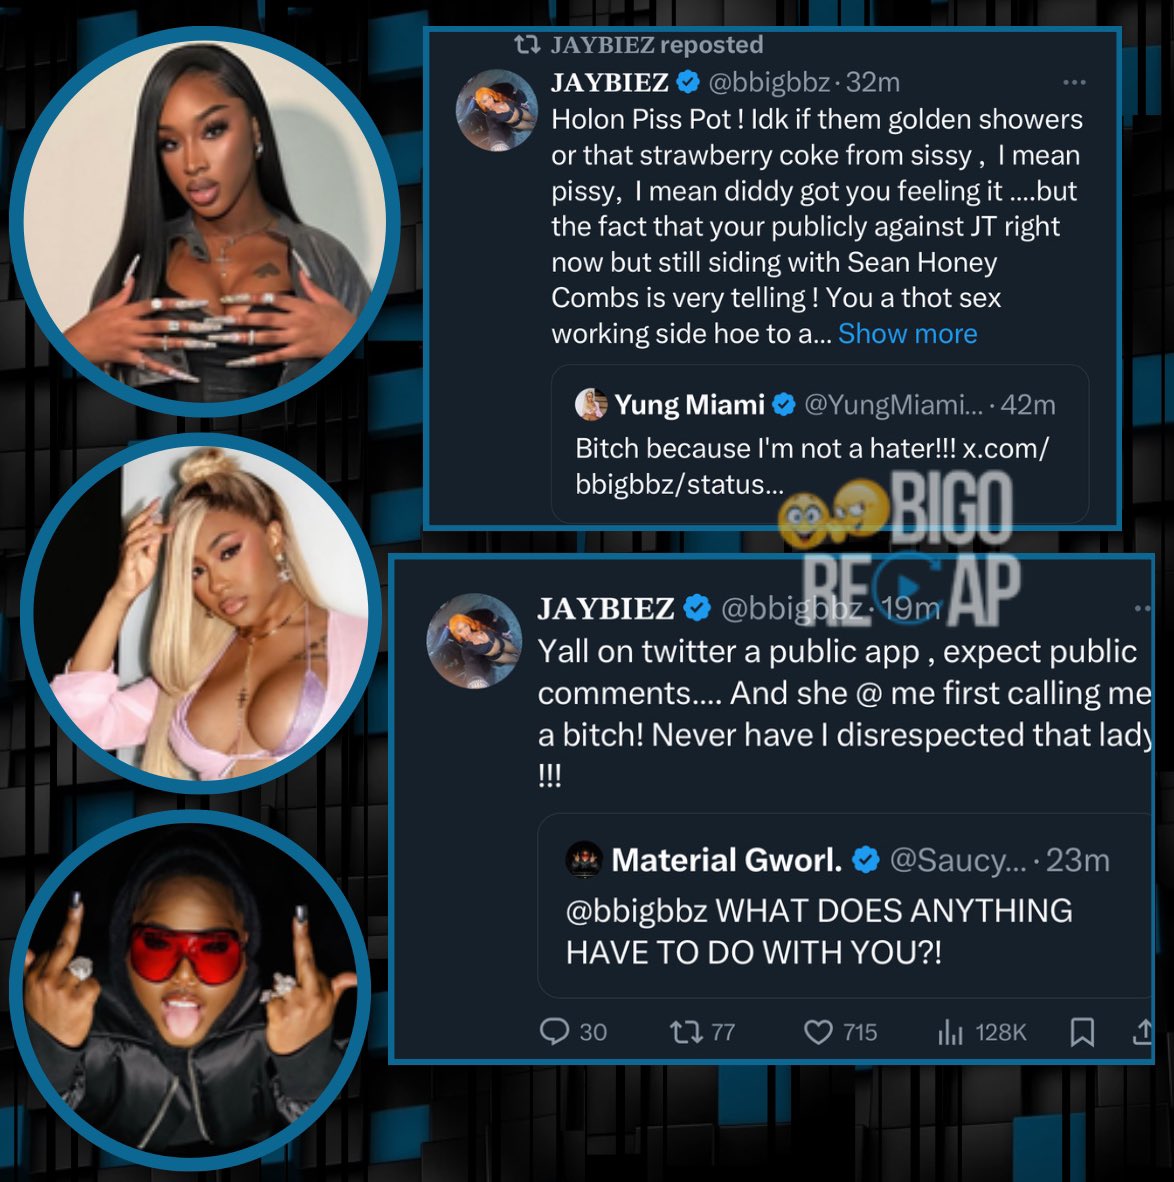 Bigo host #Jaybiez jumps to the defense of rapper #JT who’s 1 1/2 of the group #CityGirls while she & her group member #YungMiami go at it online via Twitter(X) #YungMiami responds to #Jaybiez , so does her bestie #SaucySantana . Take a look! 🫢👀 📱 #Bigorecap #Bigolive…